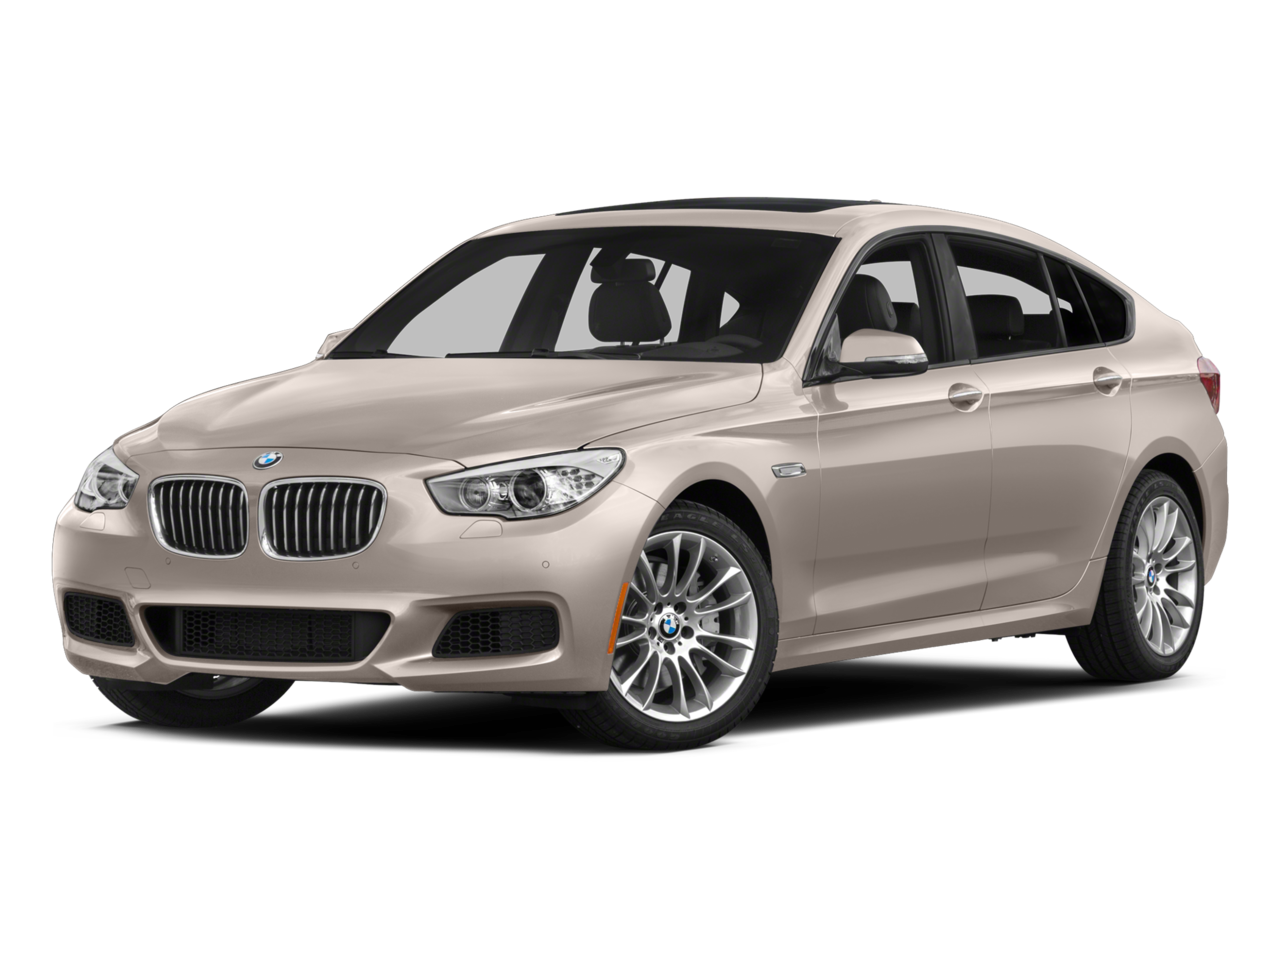  BMW 550I-Gt oem parts and accessories on sale